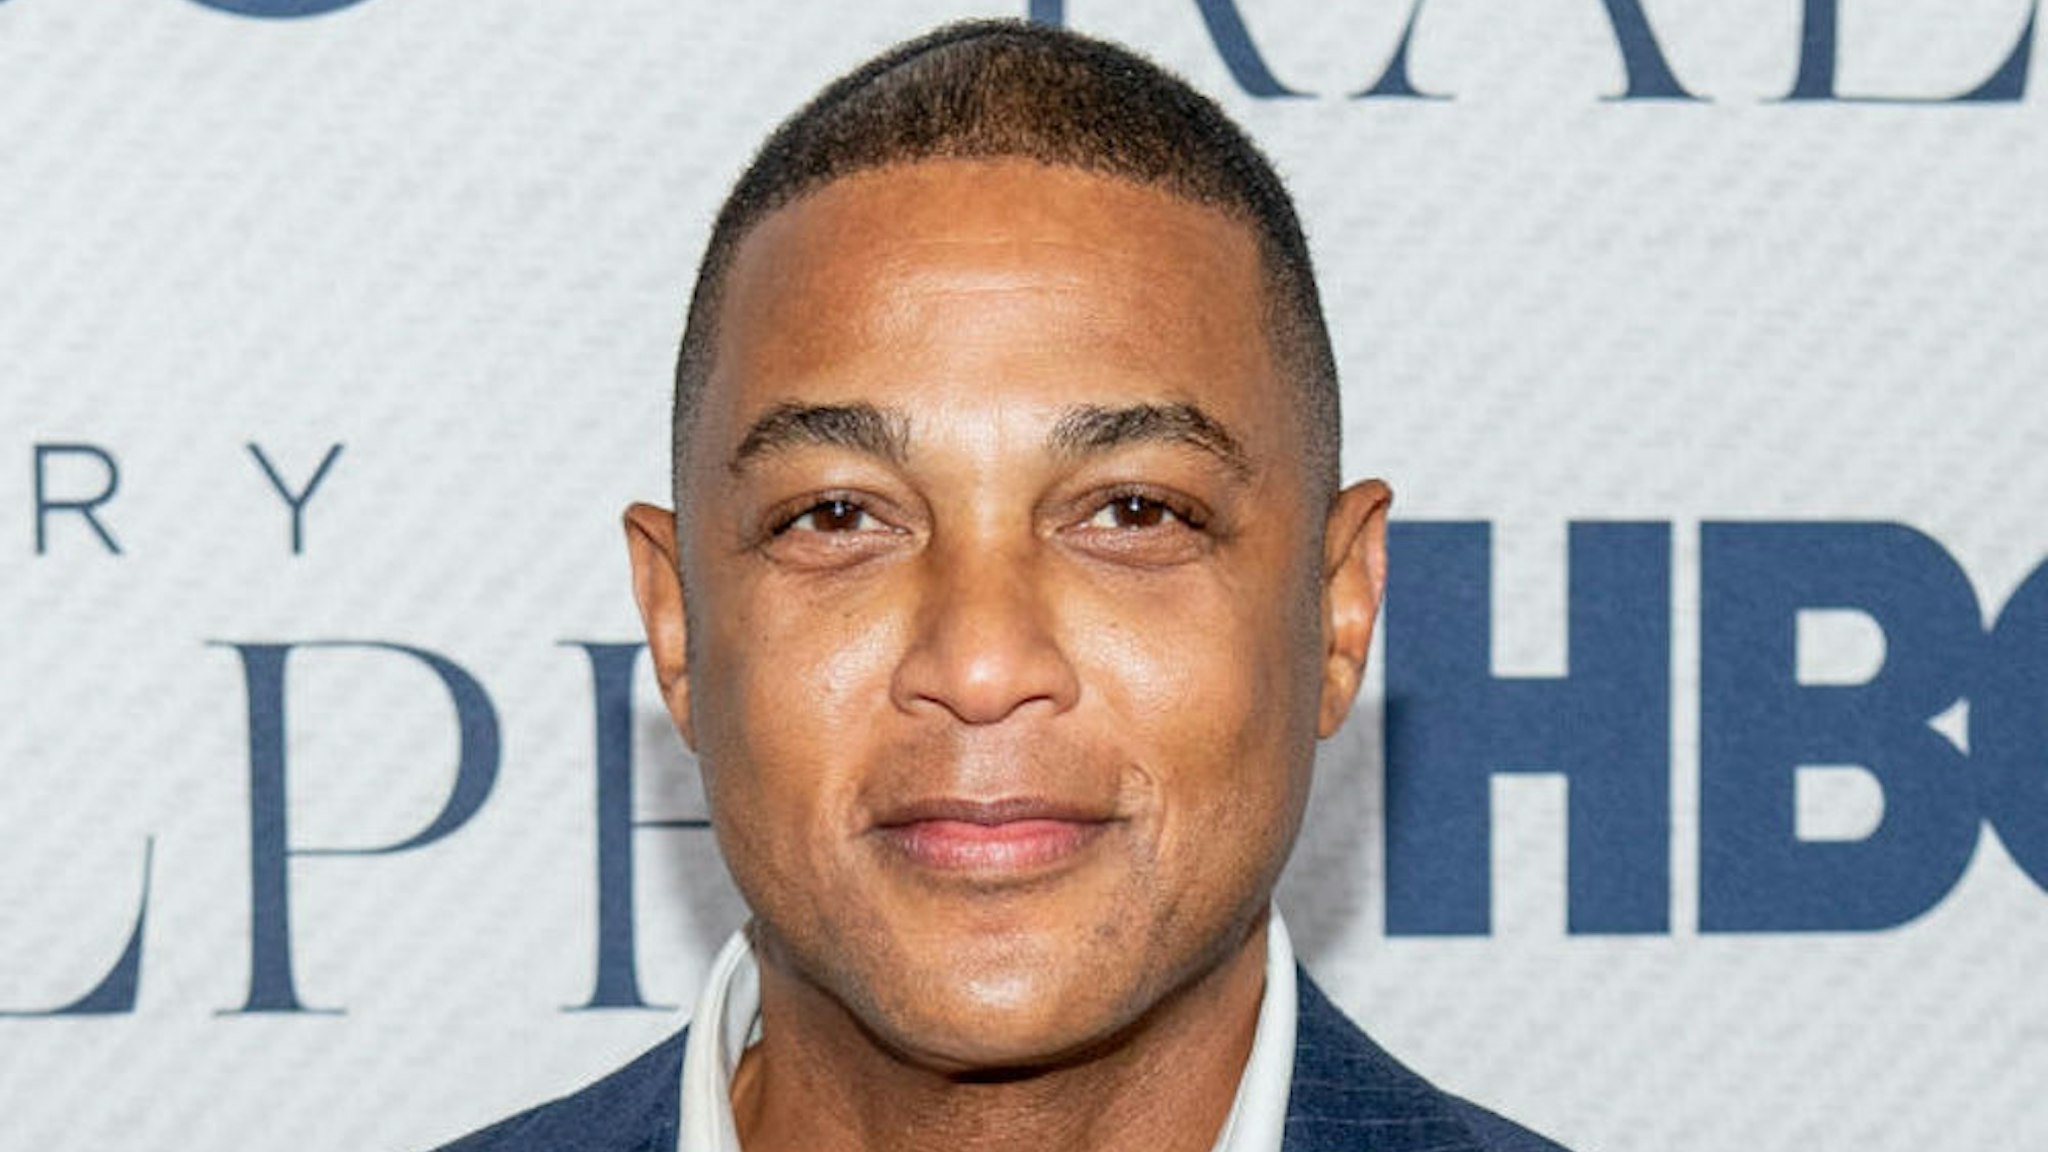 NEW YORK, NEW YORK - OCTOBER 23: Don Lemon attends HBO's "Very Ralph" World Premiere at The Metropolitan Museum of Art on October 23, 2019 in New York City. (Photo by Roy Rochlin/WireImage)